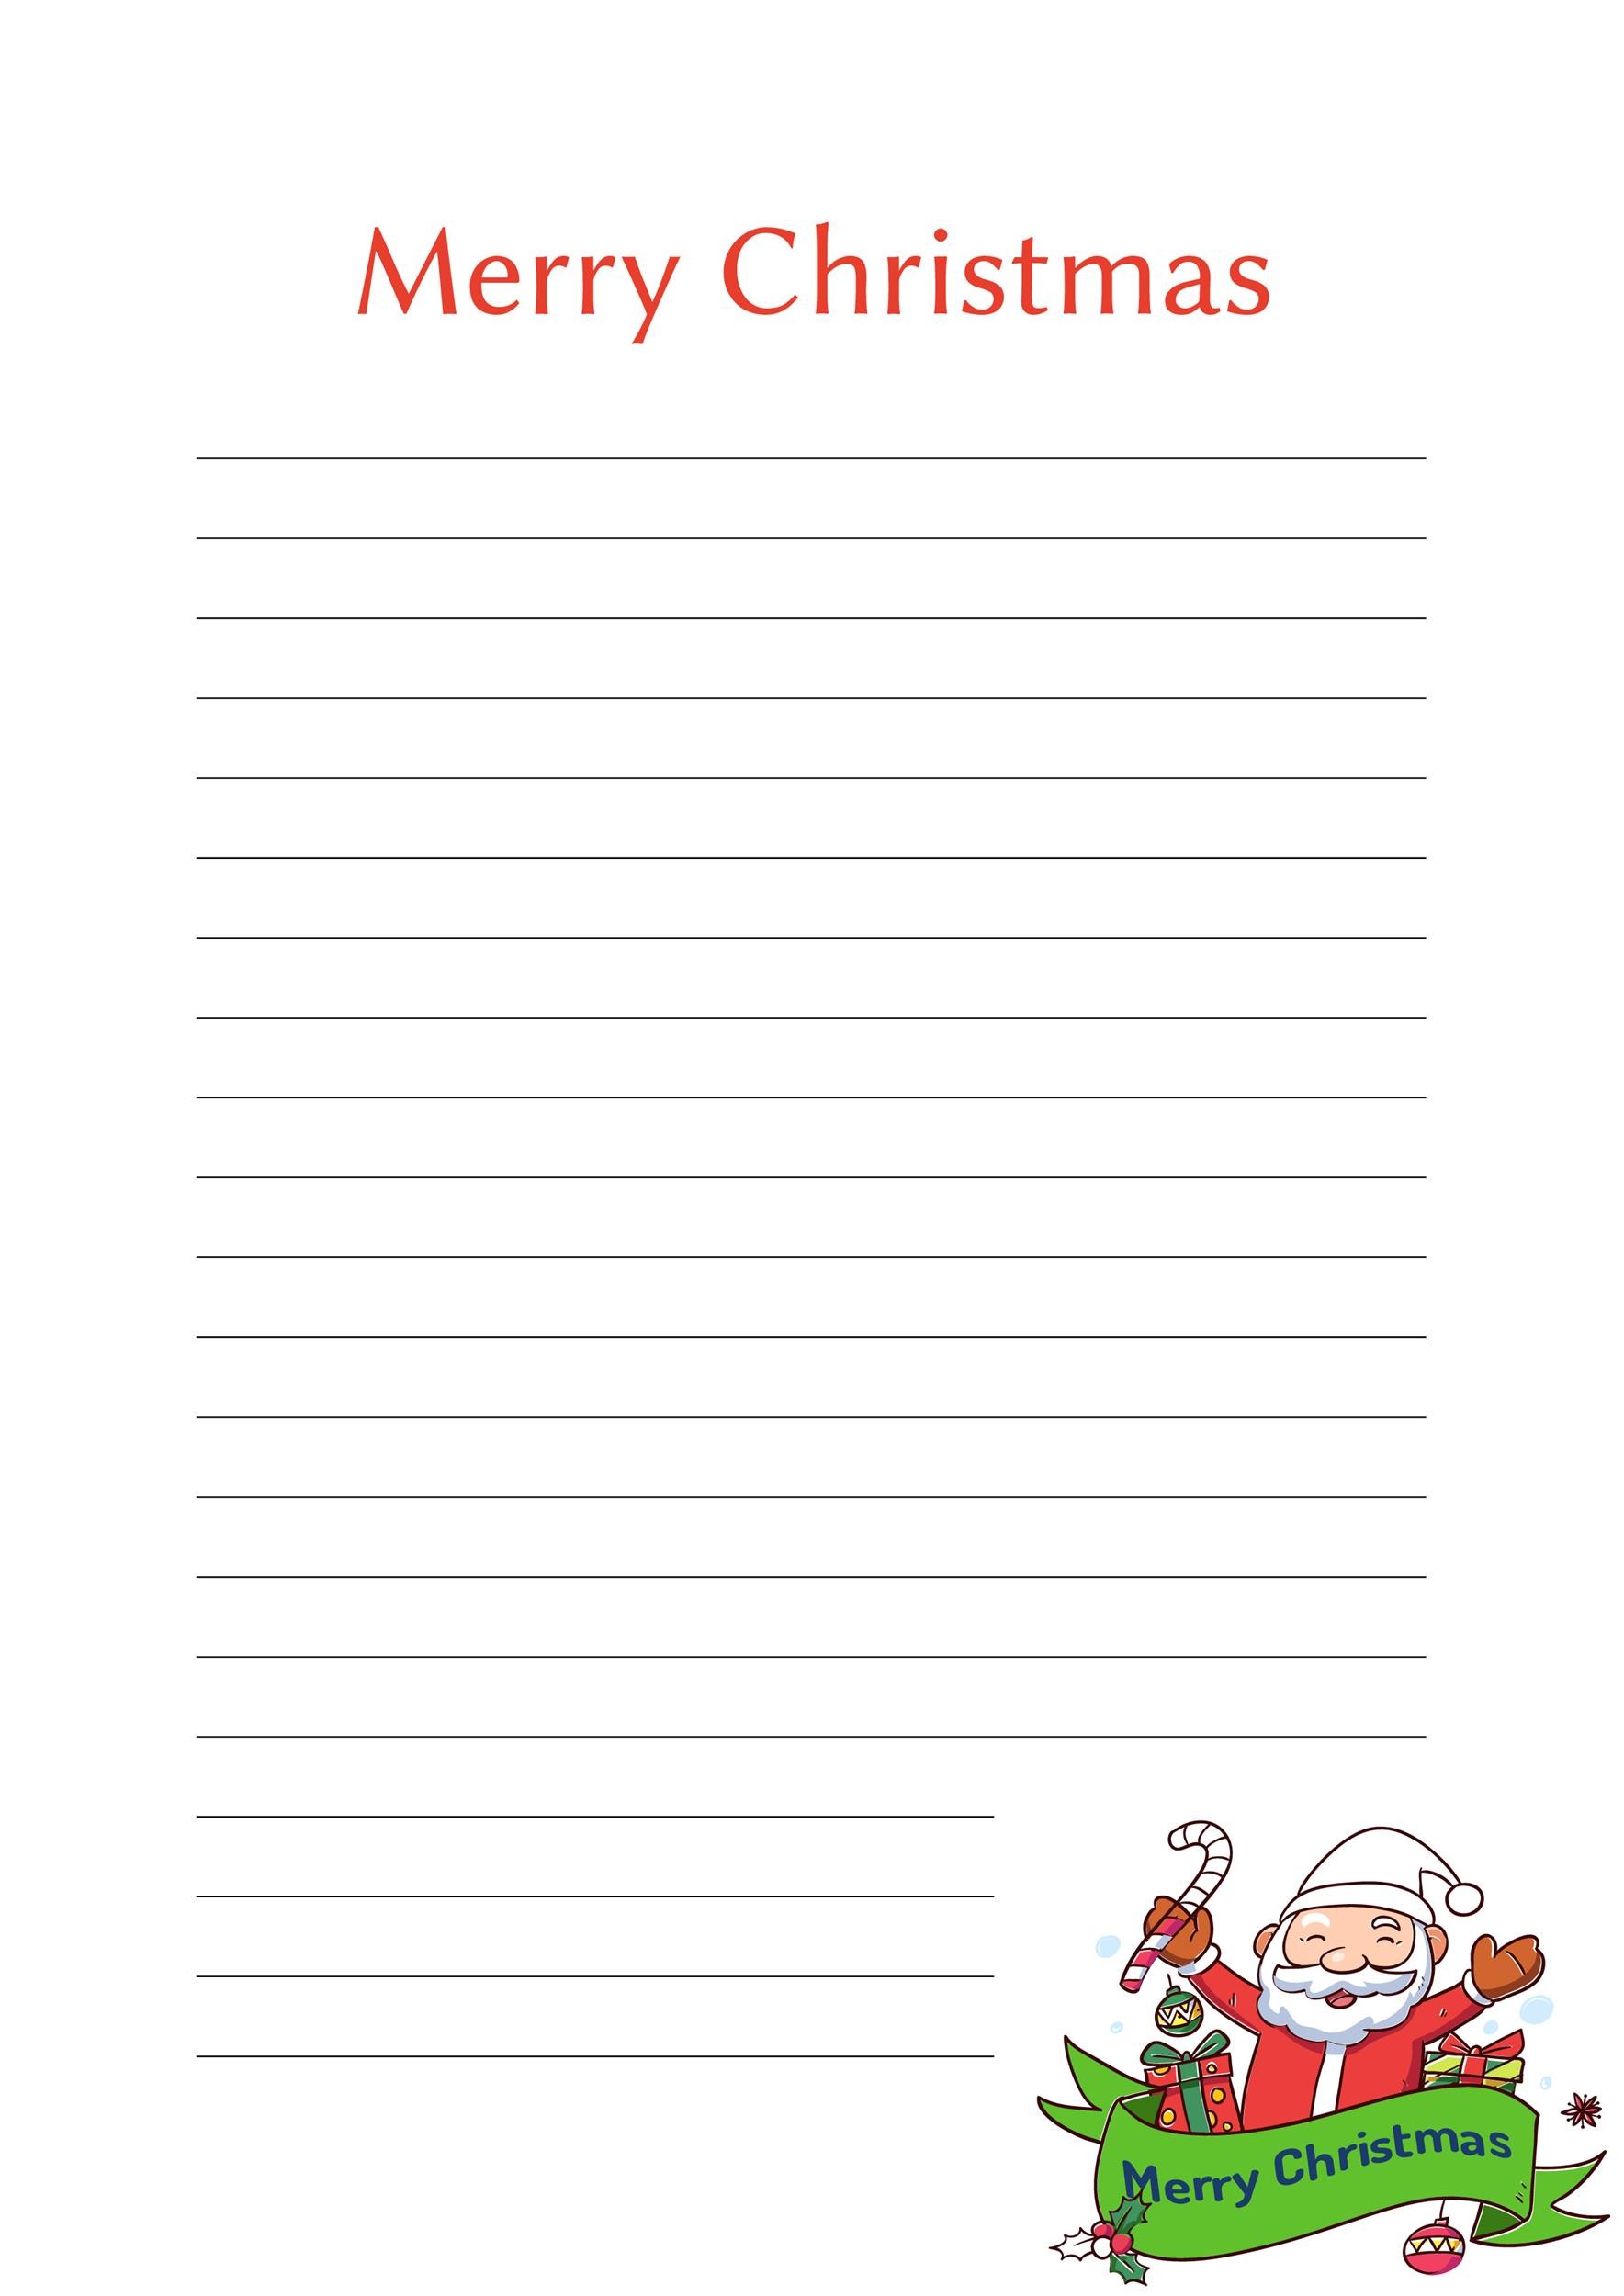 Free lined paper template 15